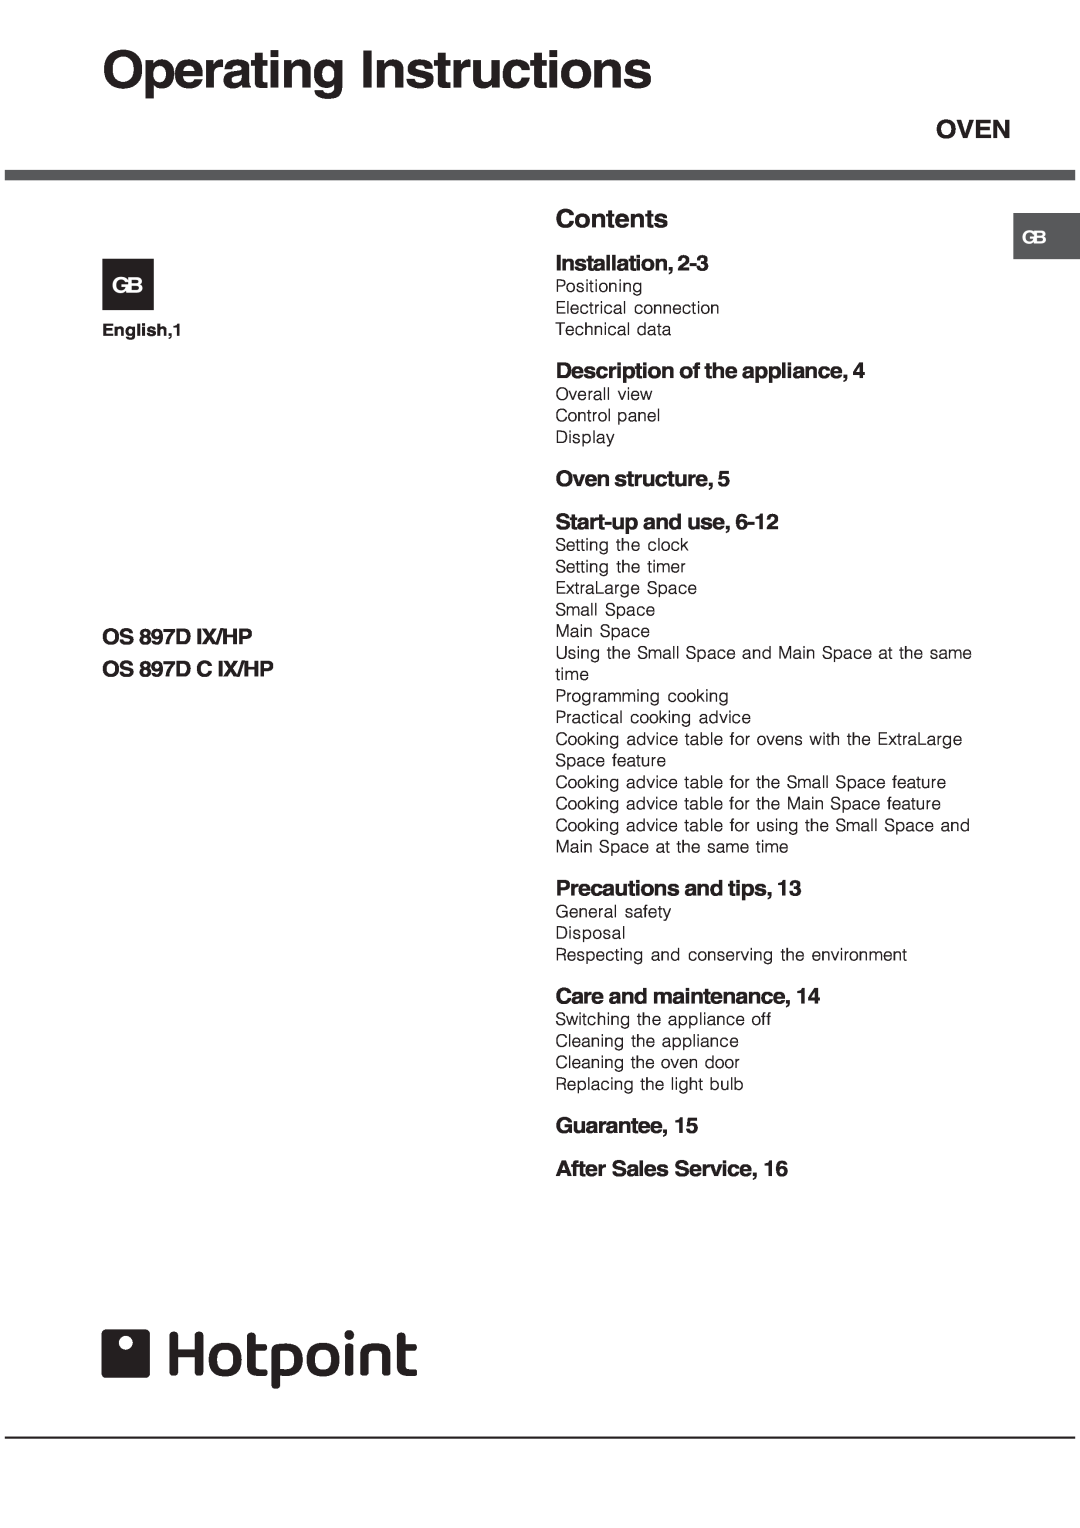 Hotpoint OS 897D IX/HP manual Operating Instructions, Installation, Description of the appliance, Precautions and tips 